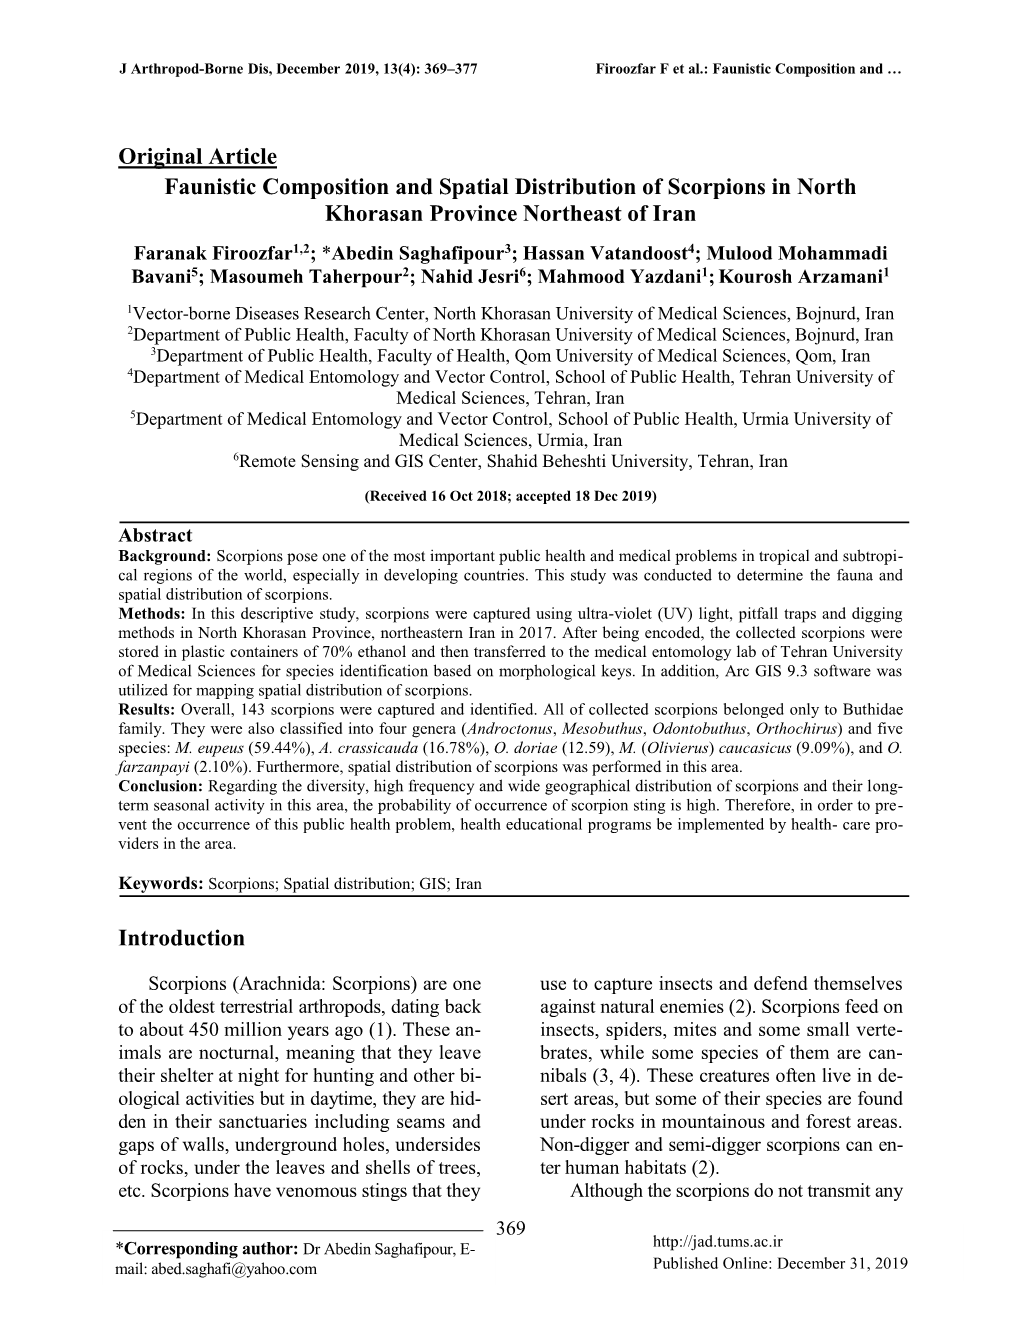 Original Article Faunistic Composition and Spatial Distribution of Scorpions in North Khorasan Province Northeast of Iran